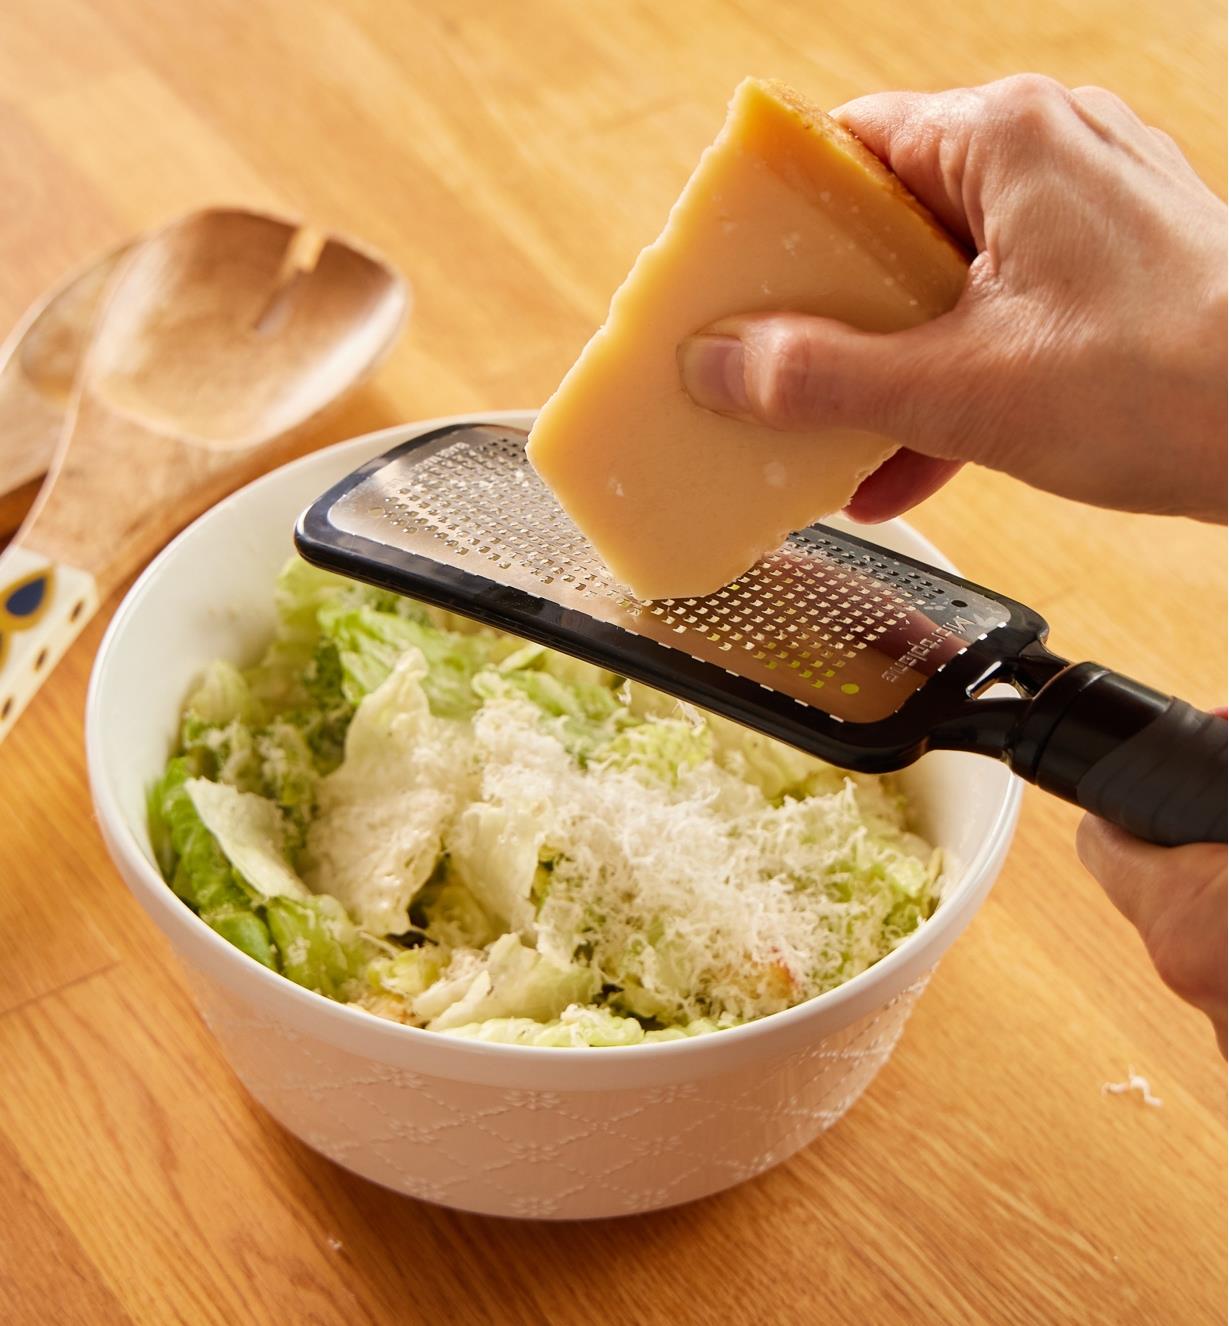 Using the fine paddle grater to grate hard cheese over a salad